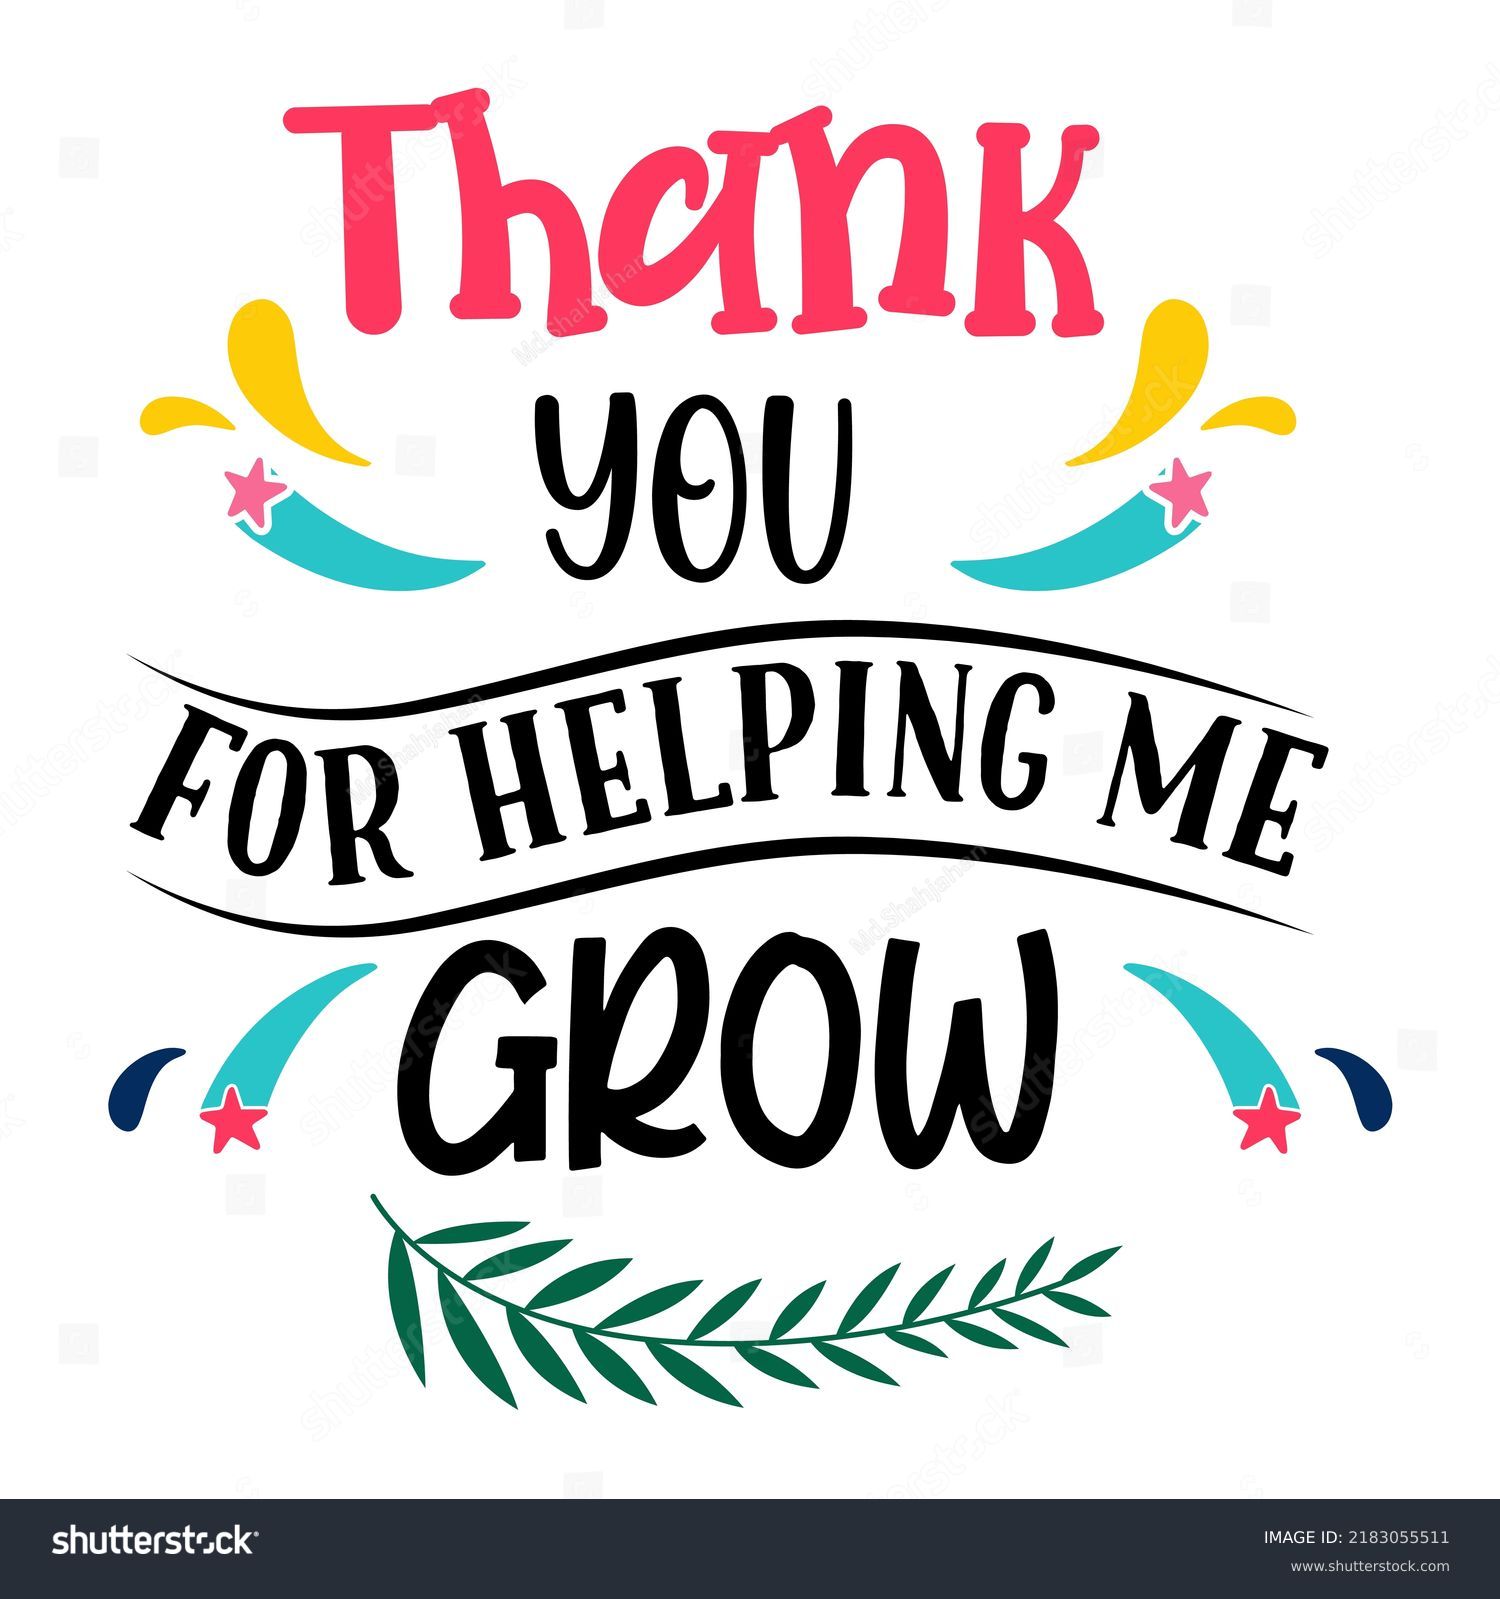 SVG of Thank you for helping me grow. Teacher quote sayings isolated on white background. Teacher vector lettering calligraphy print for back to school, graduation, teachers day.
 svg